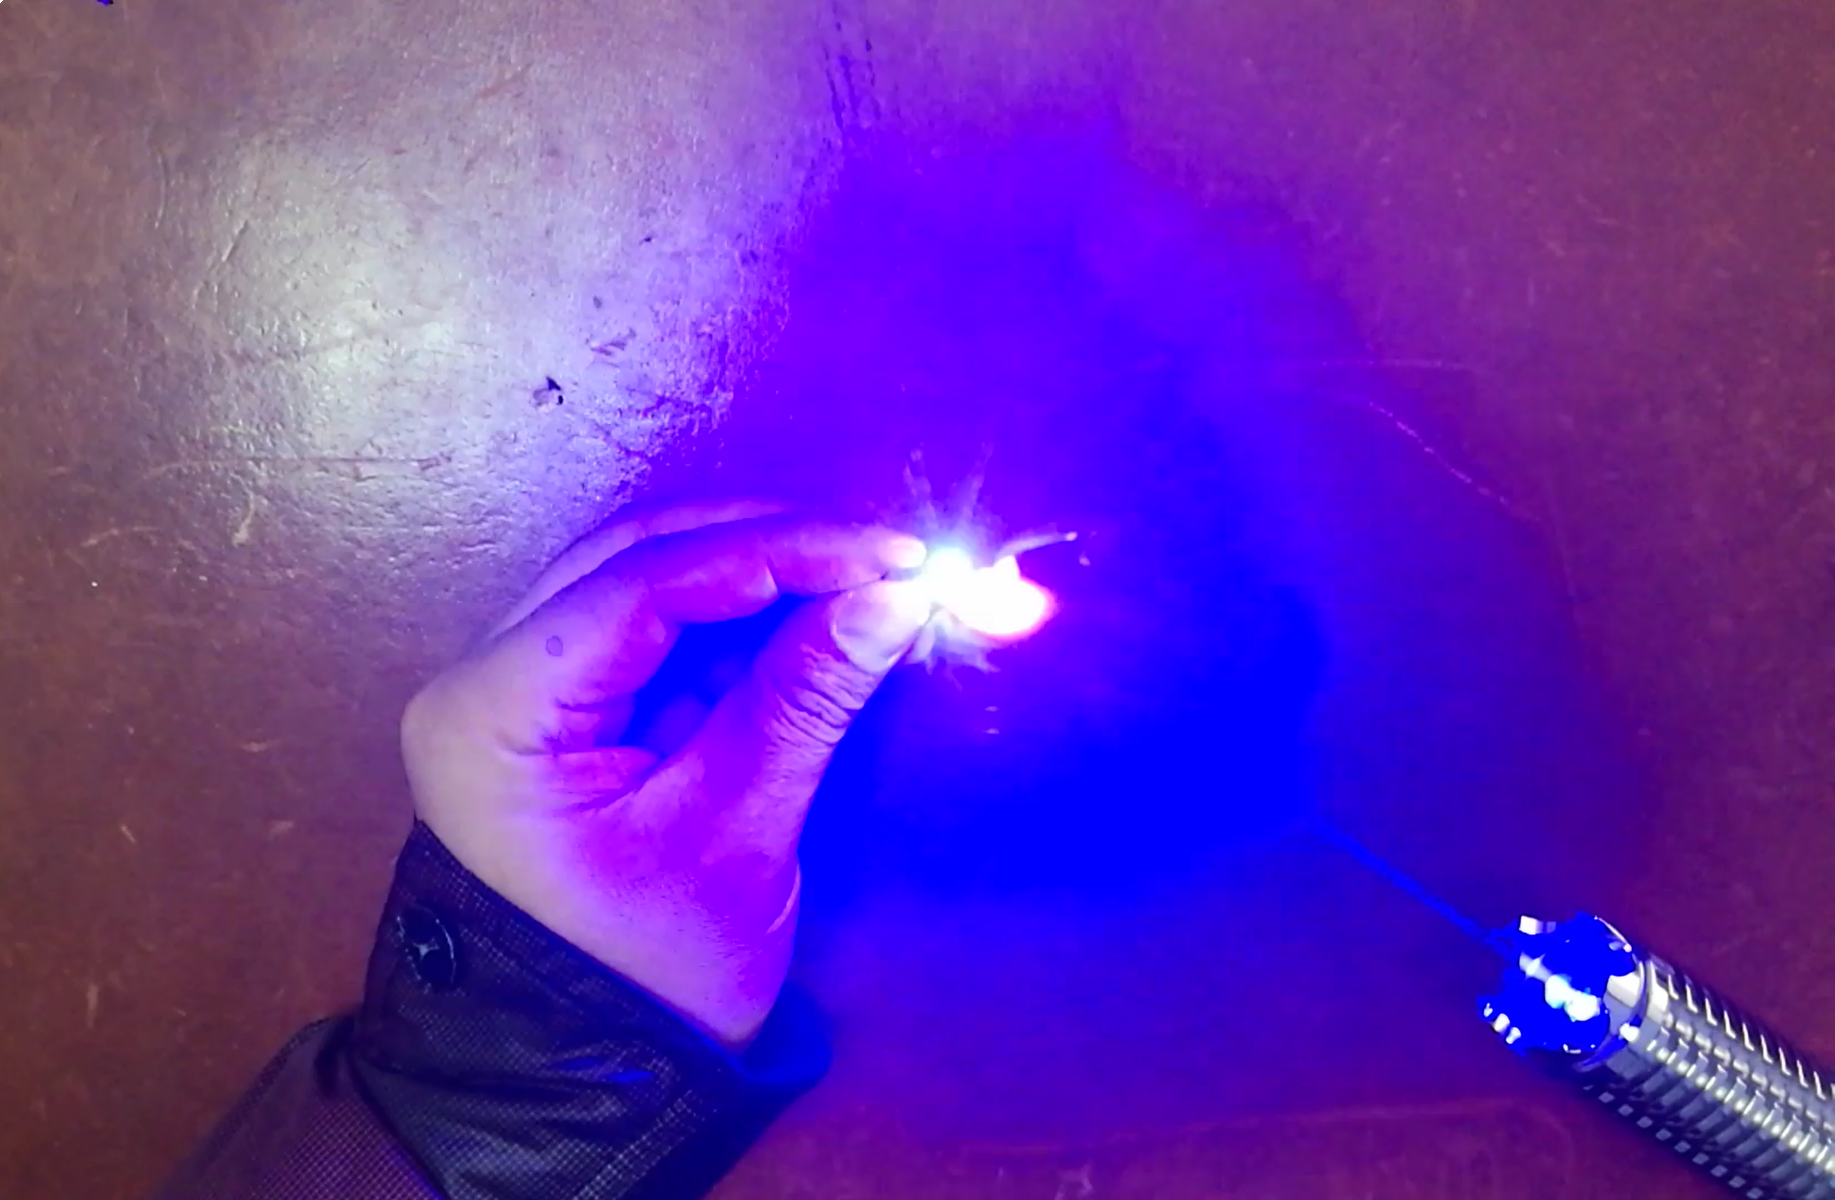 The Most Powerful Burning Blue Laser – Power Lasers